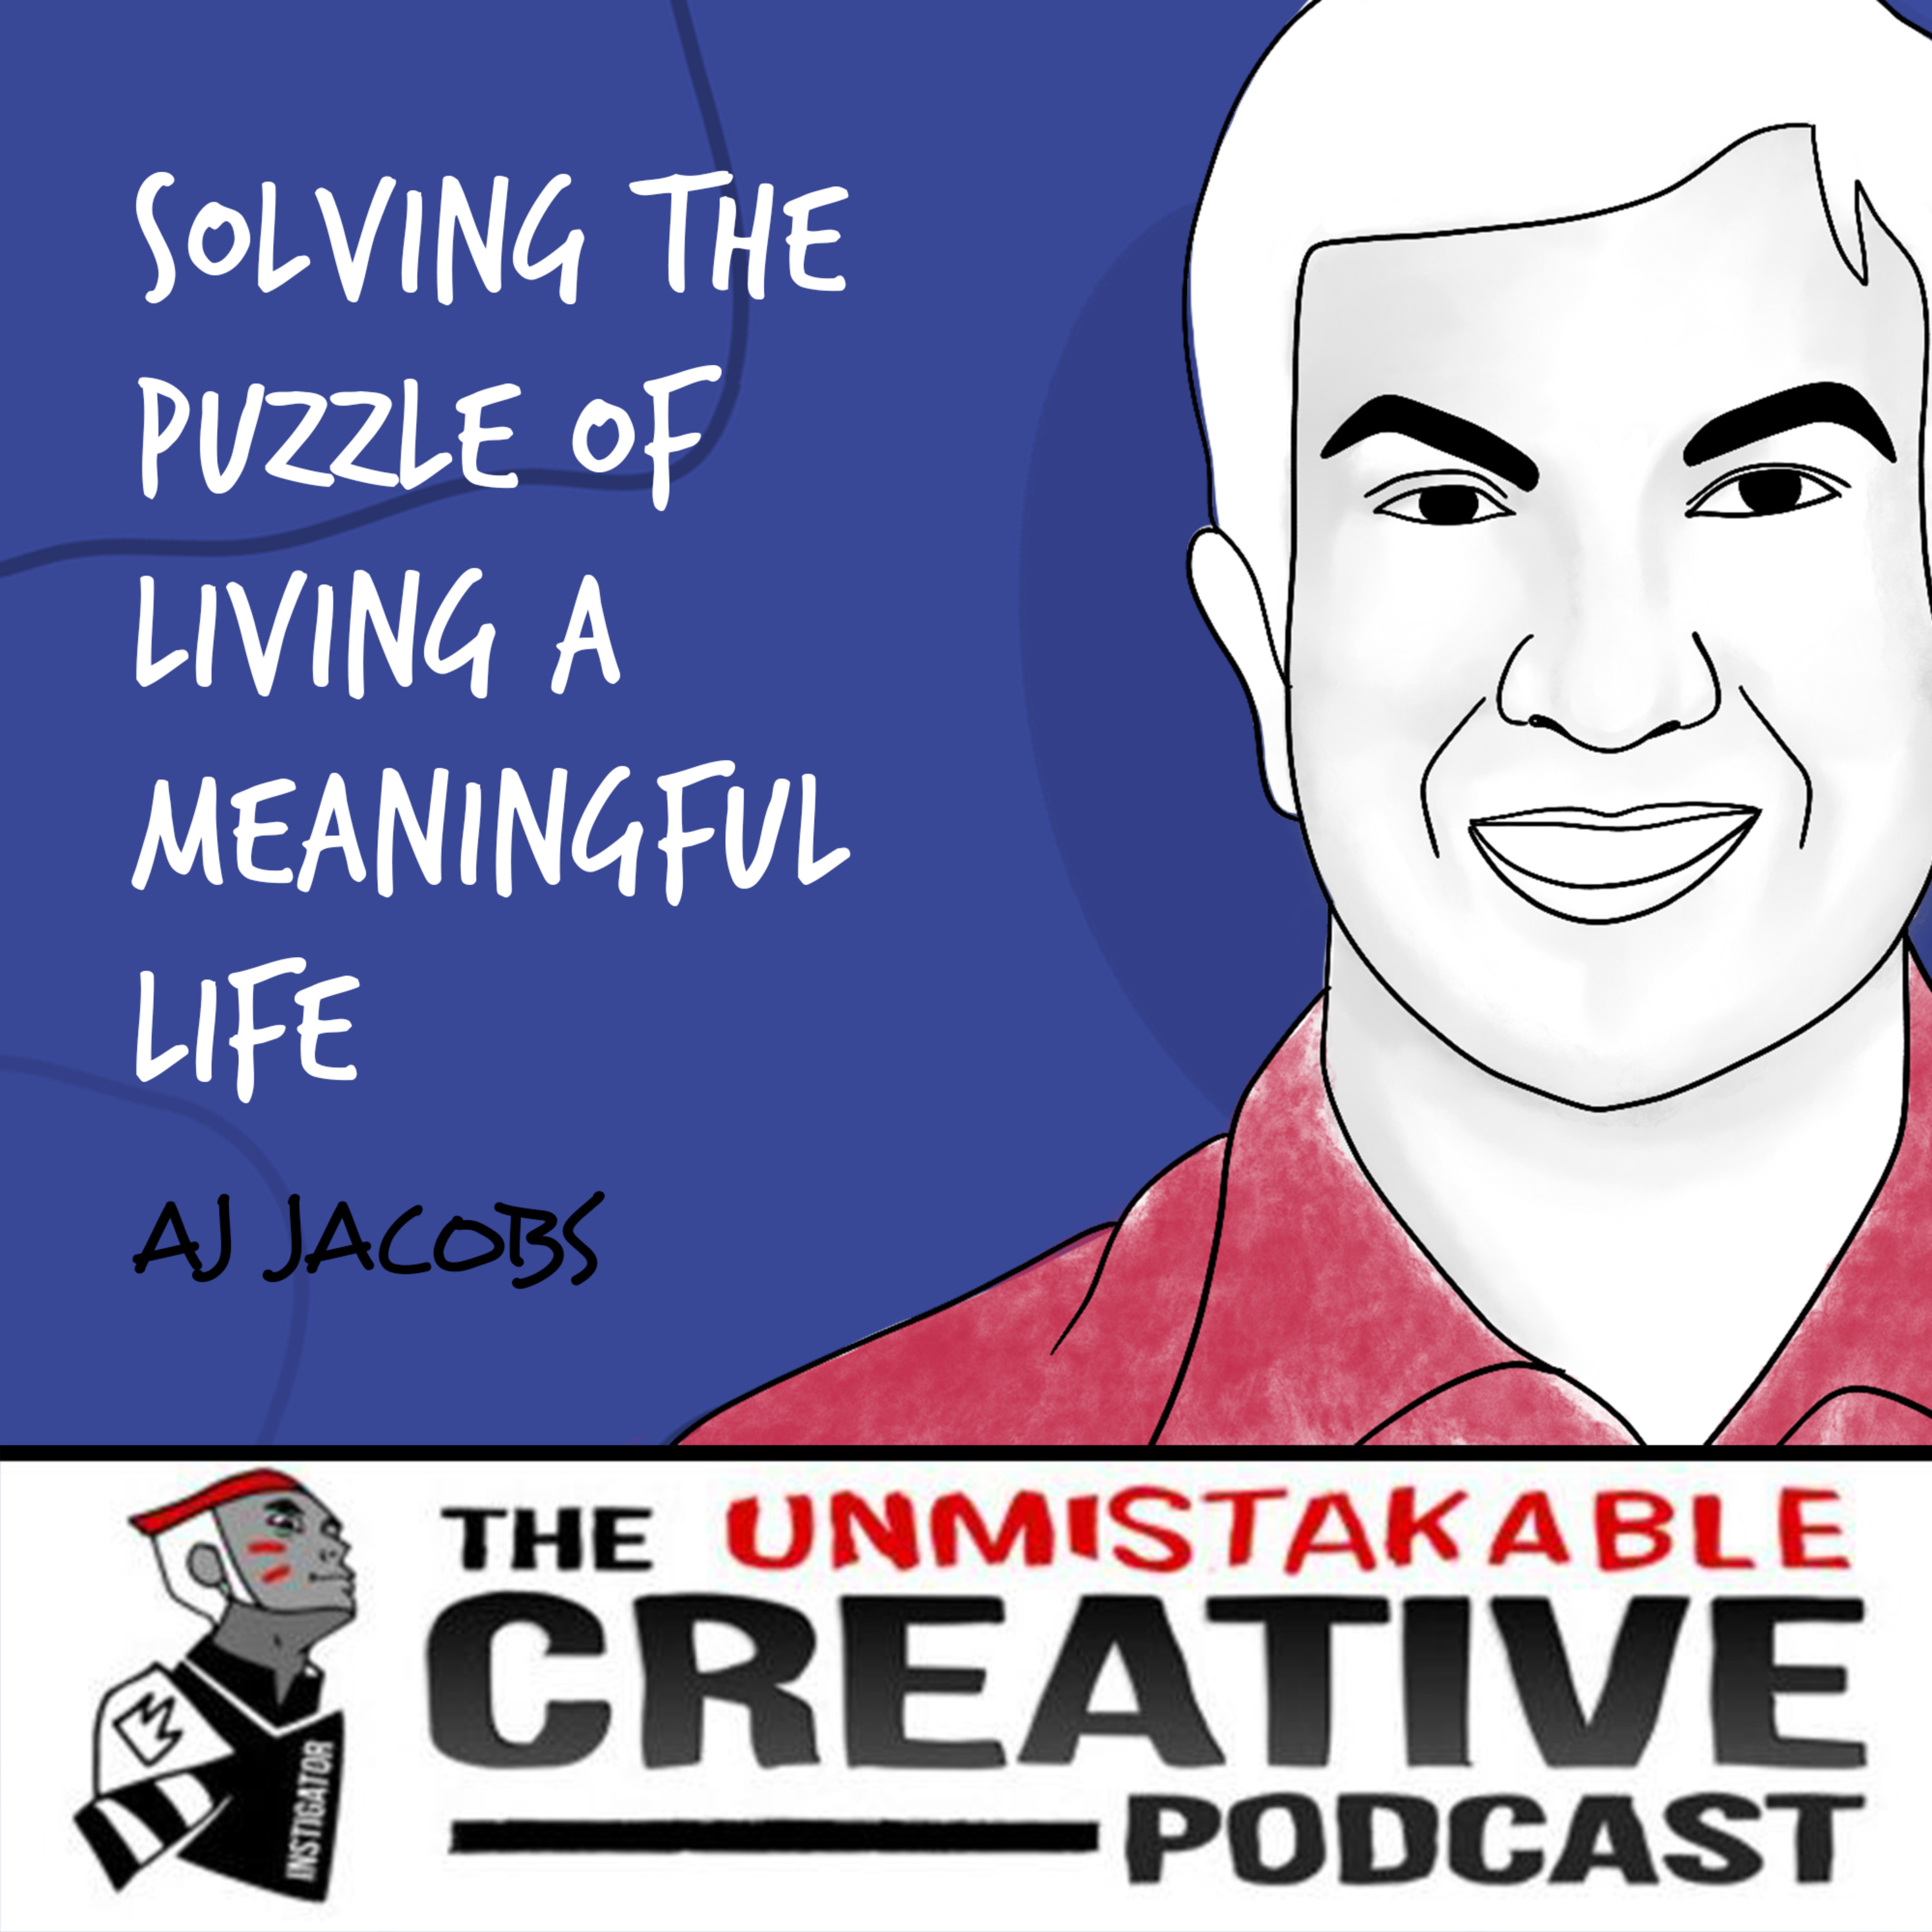 AJ Jacobs | Solving the Puzzle of Living a Meaningful Life